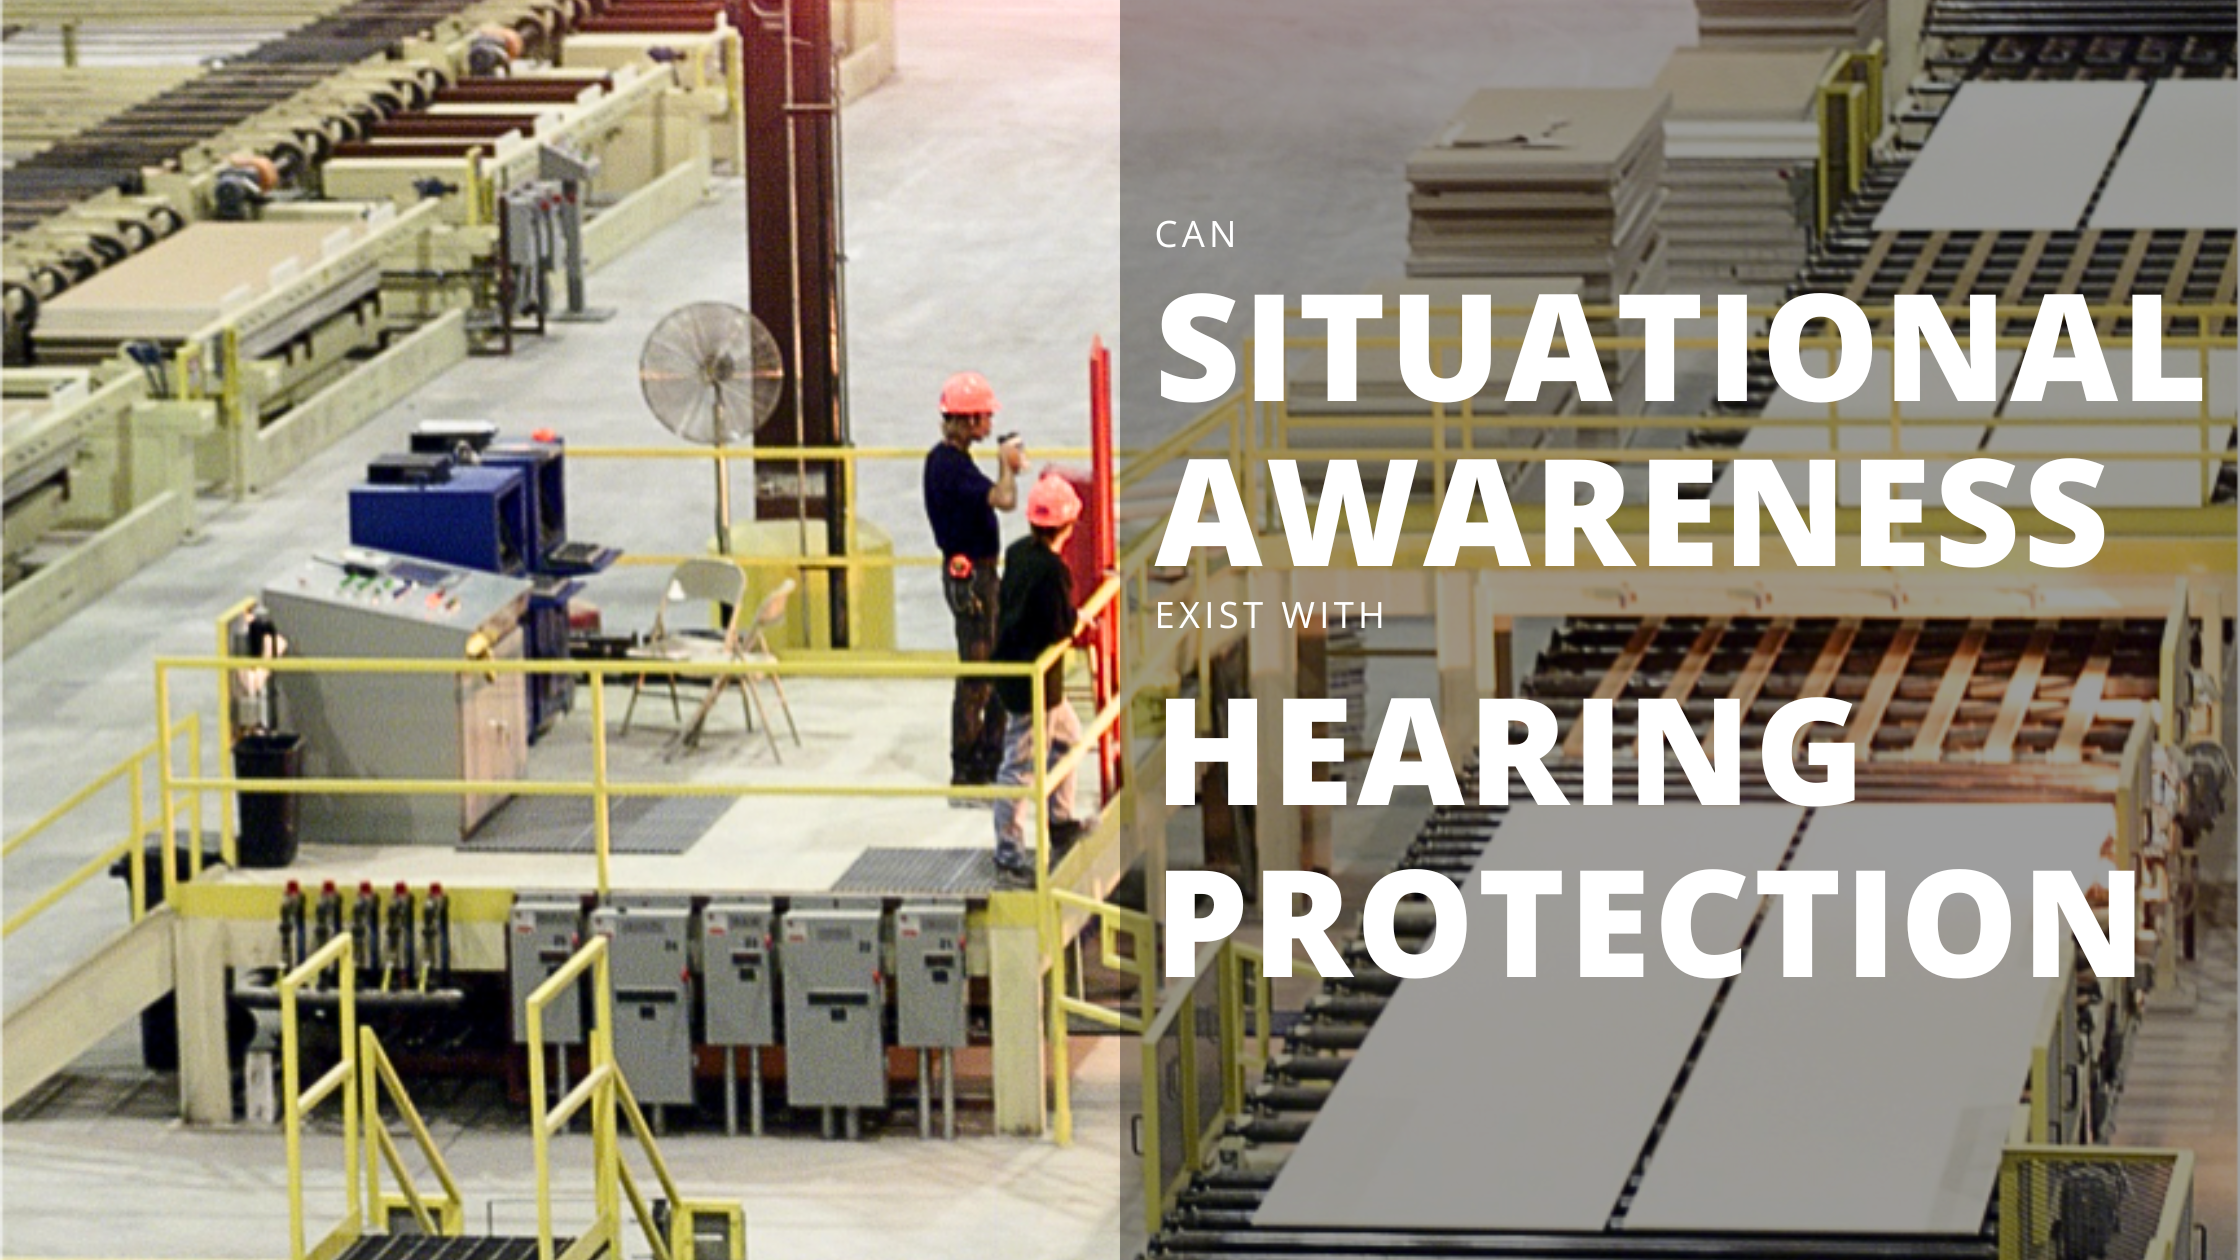 Can Situational Awareness Exist with Hearing Protection?